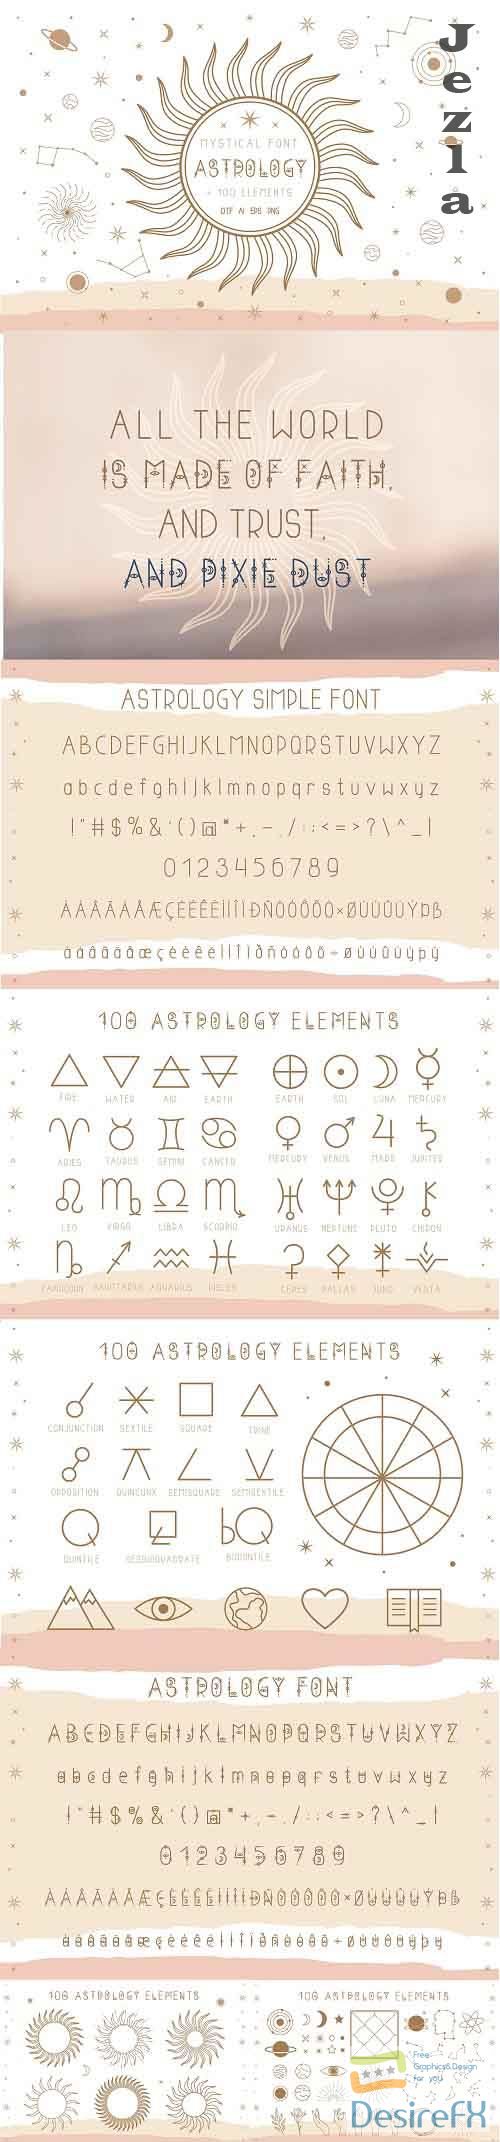 astrology font examples